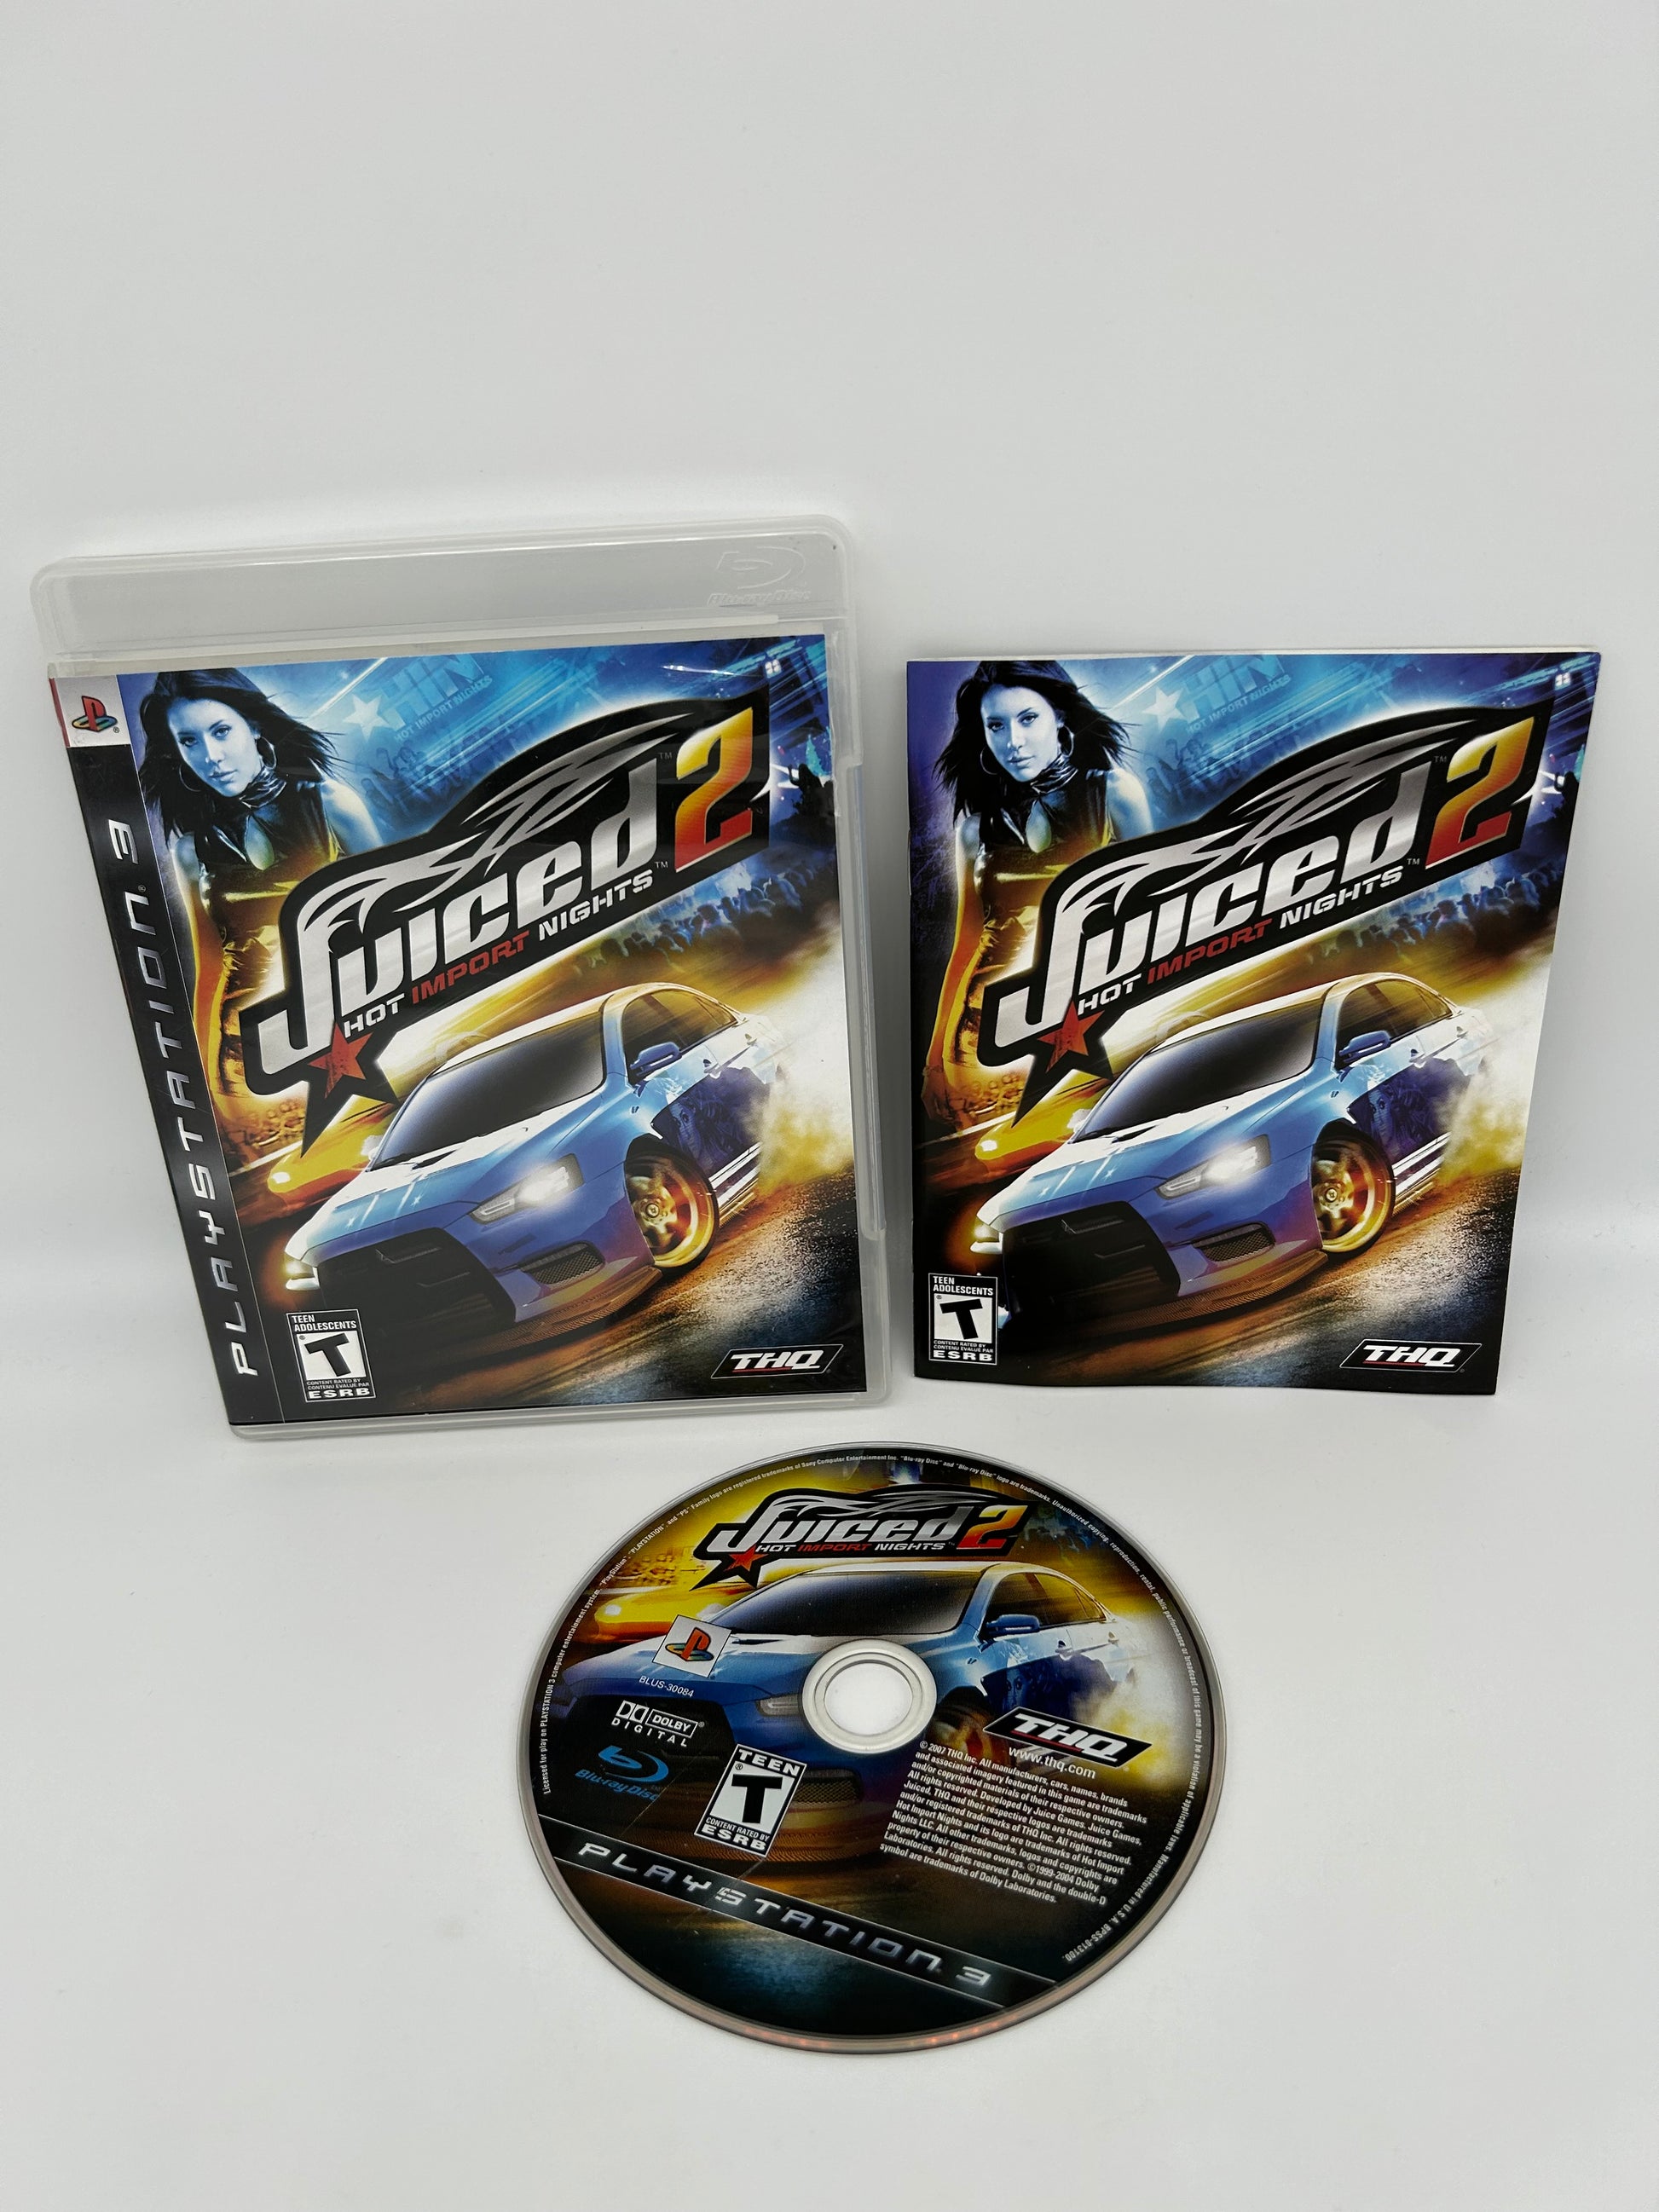 PiXEL-RETRO.COM : SONY PLAYSTATION 3 (PS3) COMPLETE IN BOX CIB MANUAL GAME NTSC JUICED 2 HOT IMPORT NIGHTS